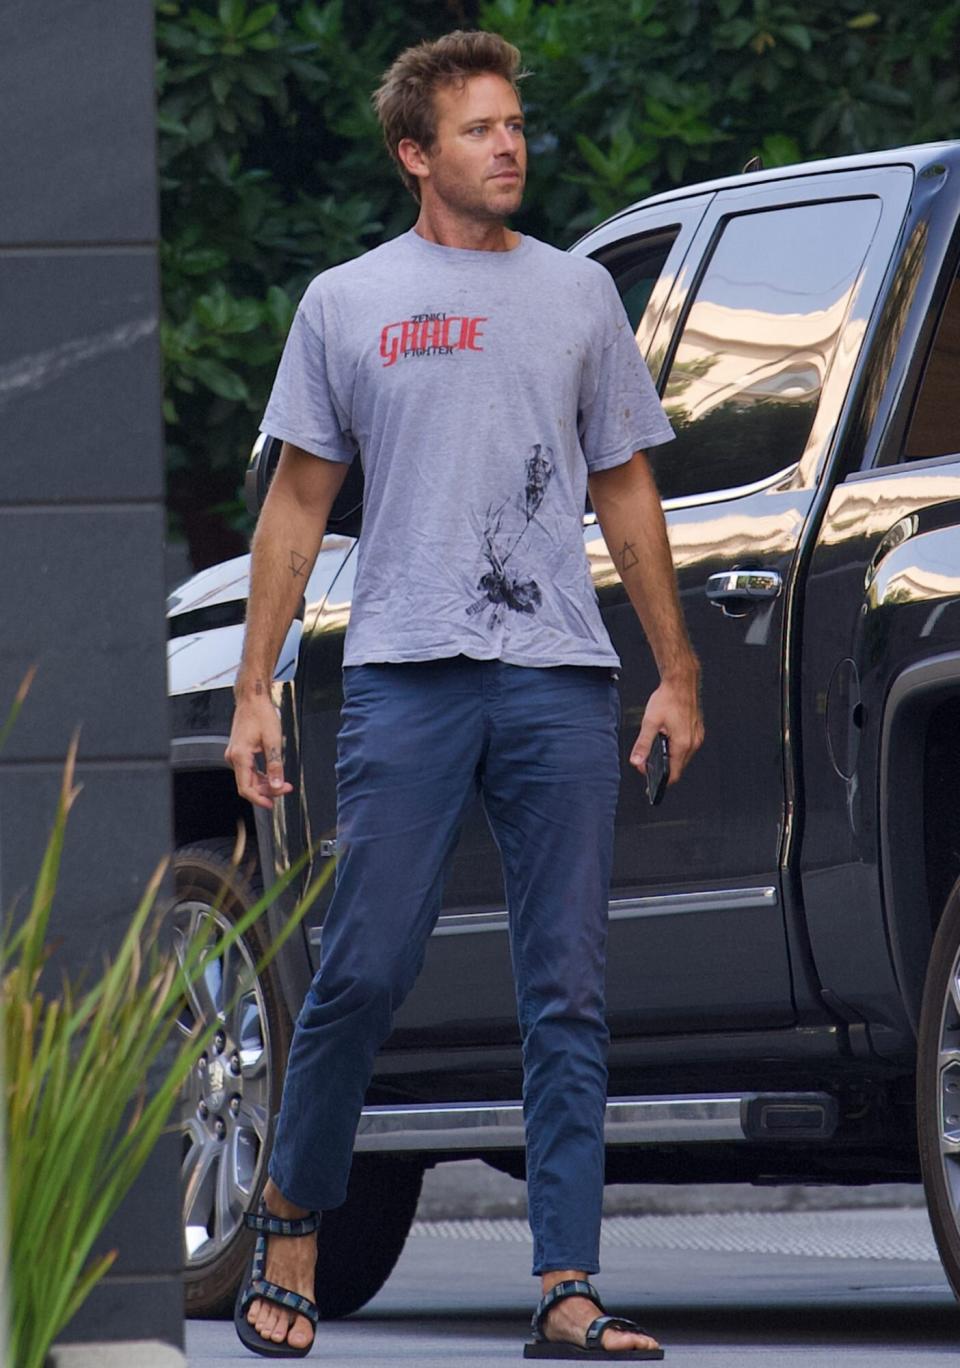 EXCLUSIVE: Armie Hammer wears a ripped and stained t-shirt as he emerges following lawsuit from American Express over $67K in unpaid charges.